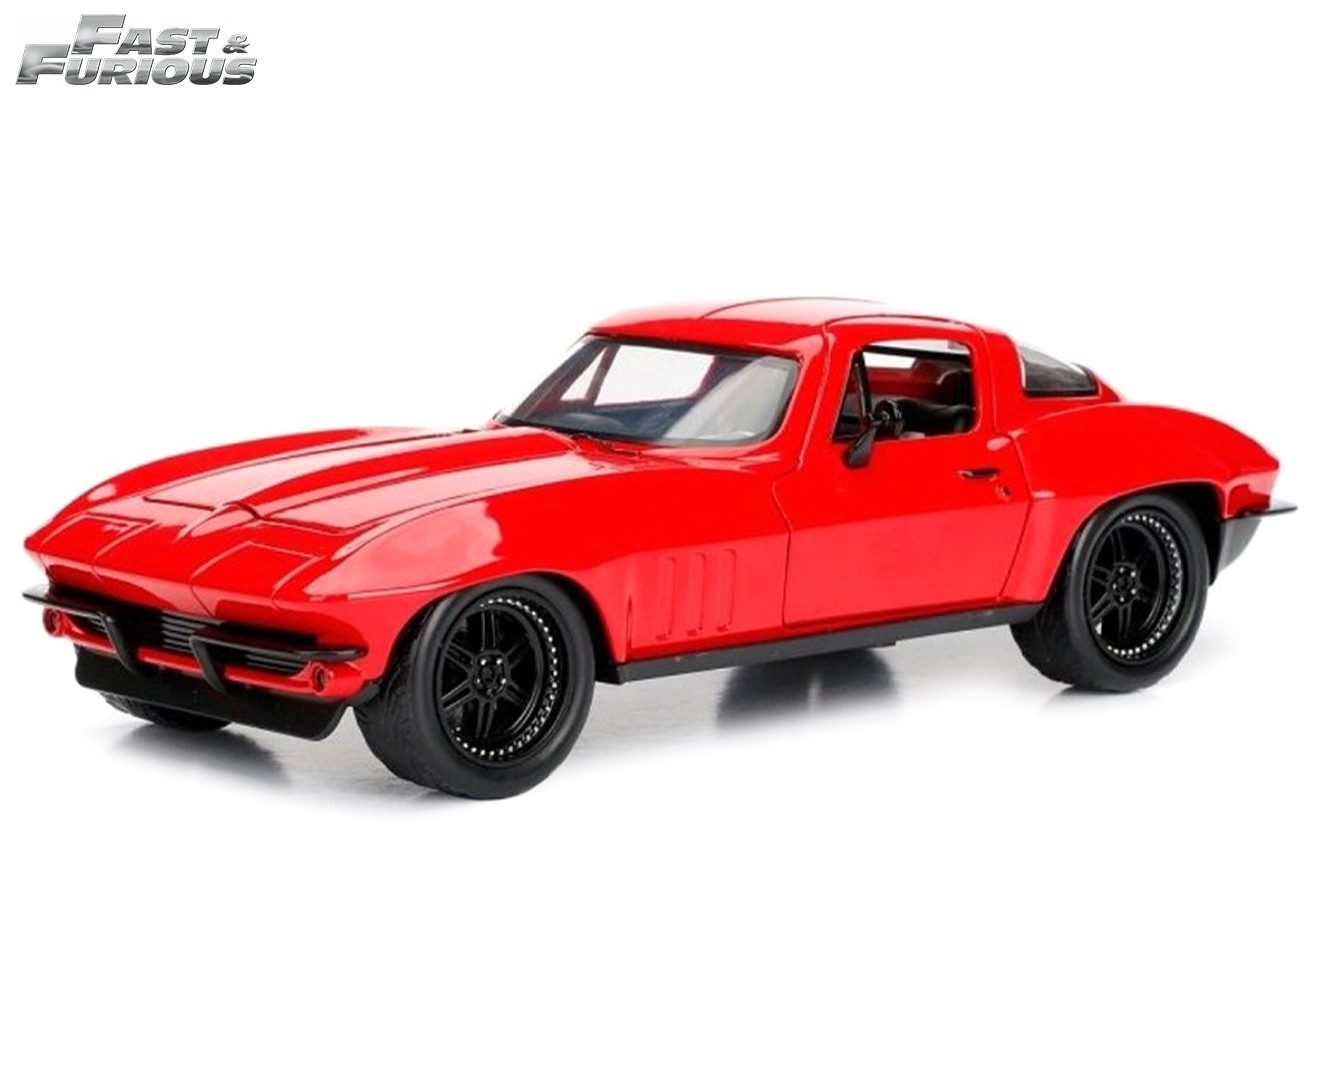 Fast And Furious Lettys 1966 Chevrolet Corvette C2 Sting Ray 124th